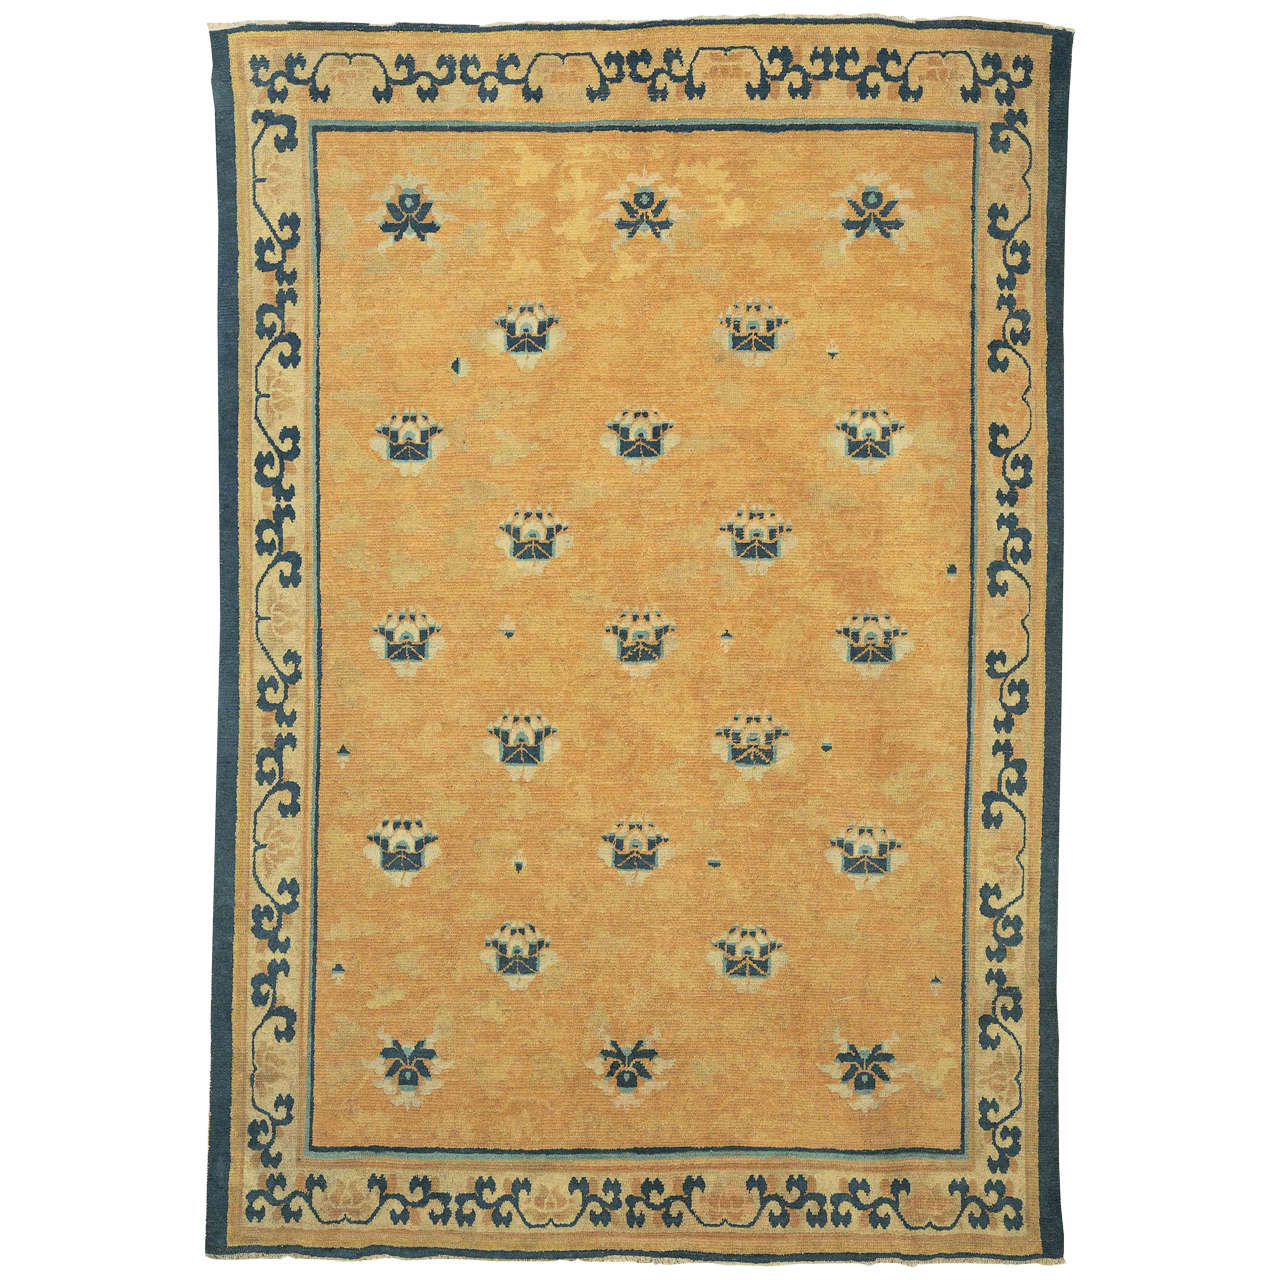 Early Chinese Ningxia Rug with Lotus Flowers